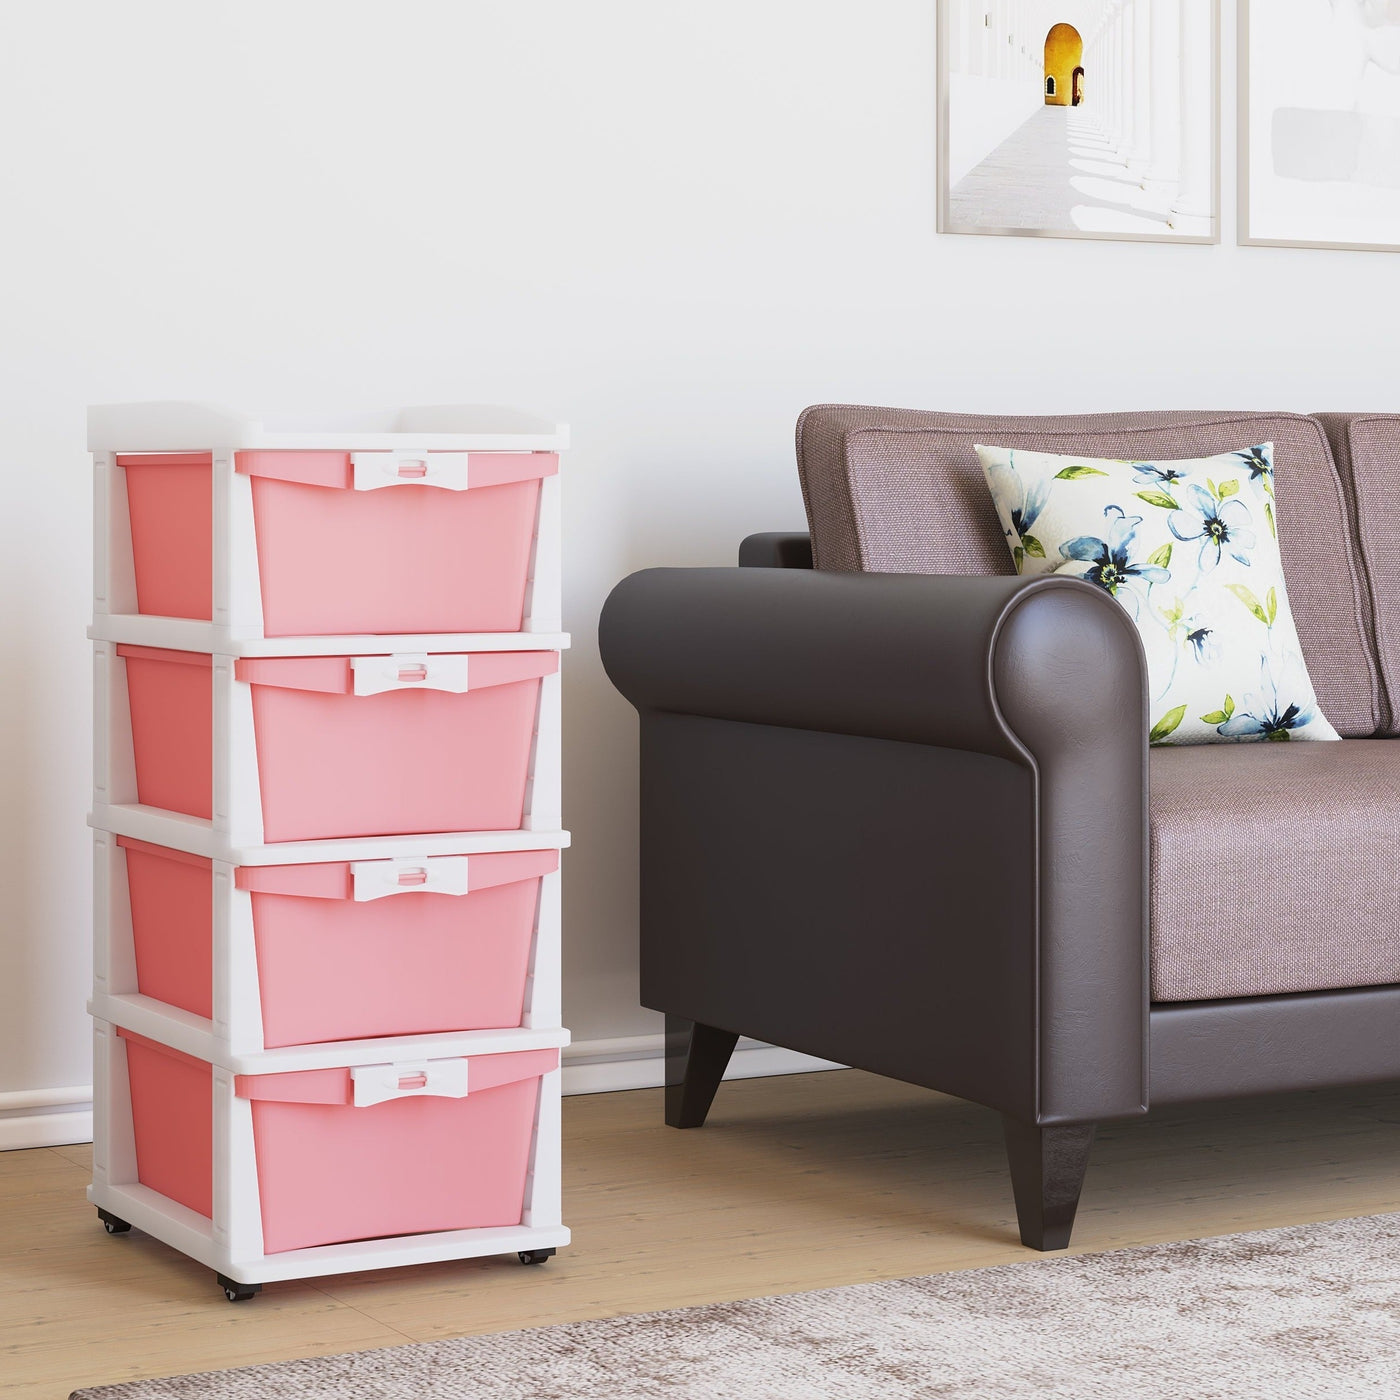 Nilkamal CHTR24 Four Layers Chest of Drawer (Pink and Cream)